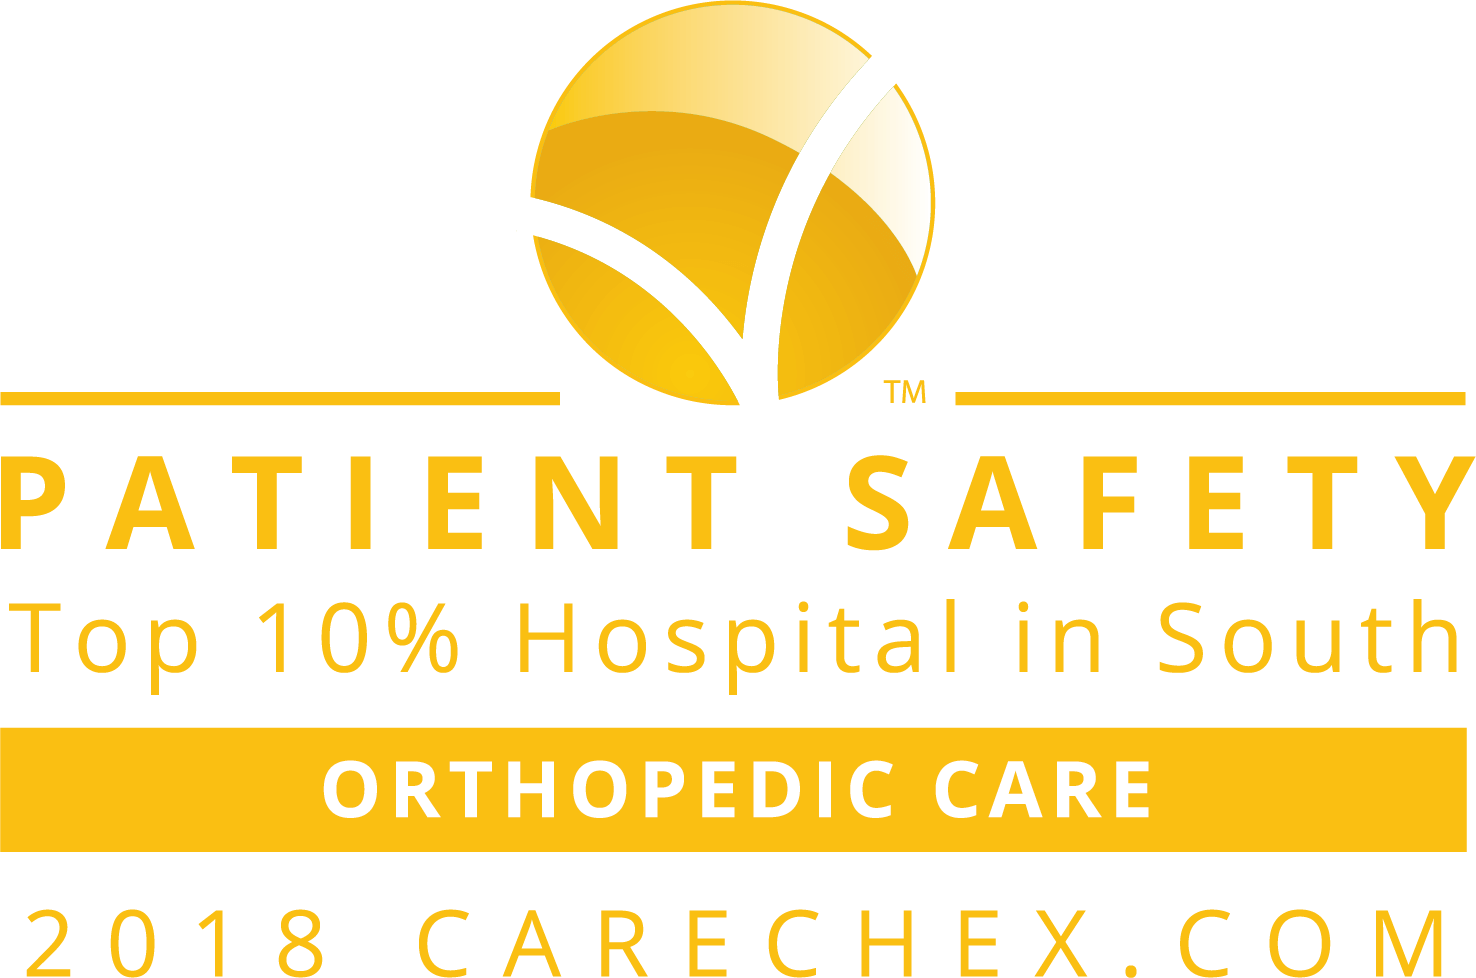 Williamson Medical Center 2018 CareChex Award - Top 10% of Hospitals in South for Patient Safety Orthopedic Care.